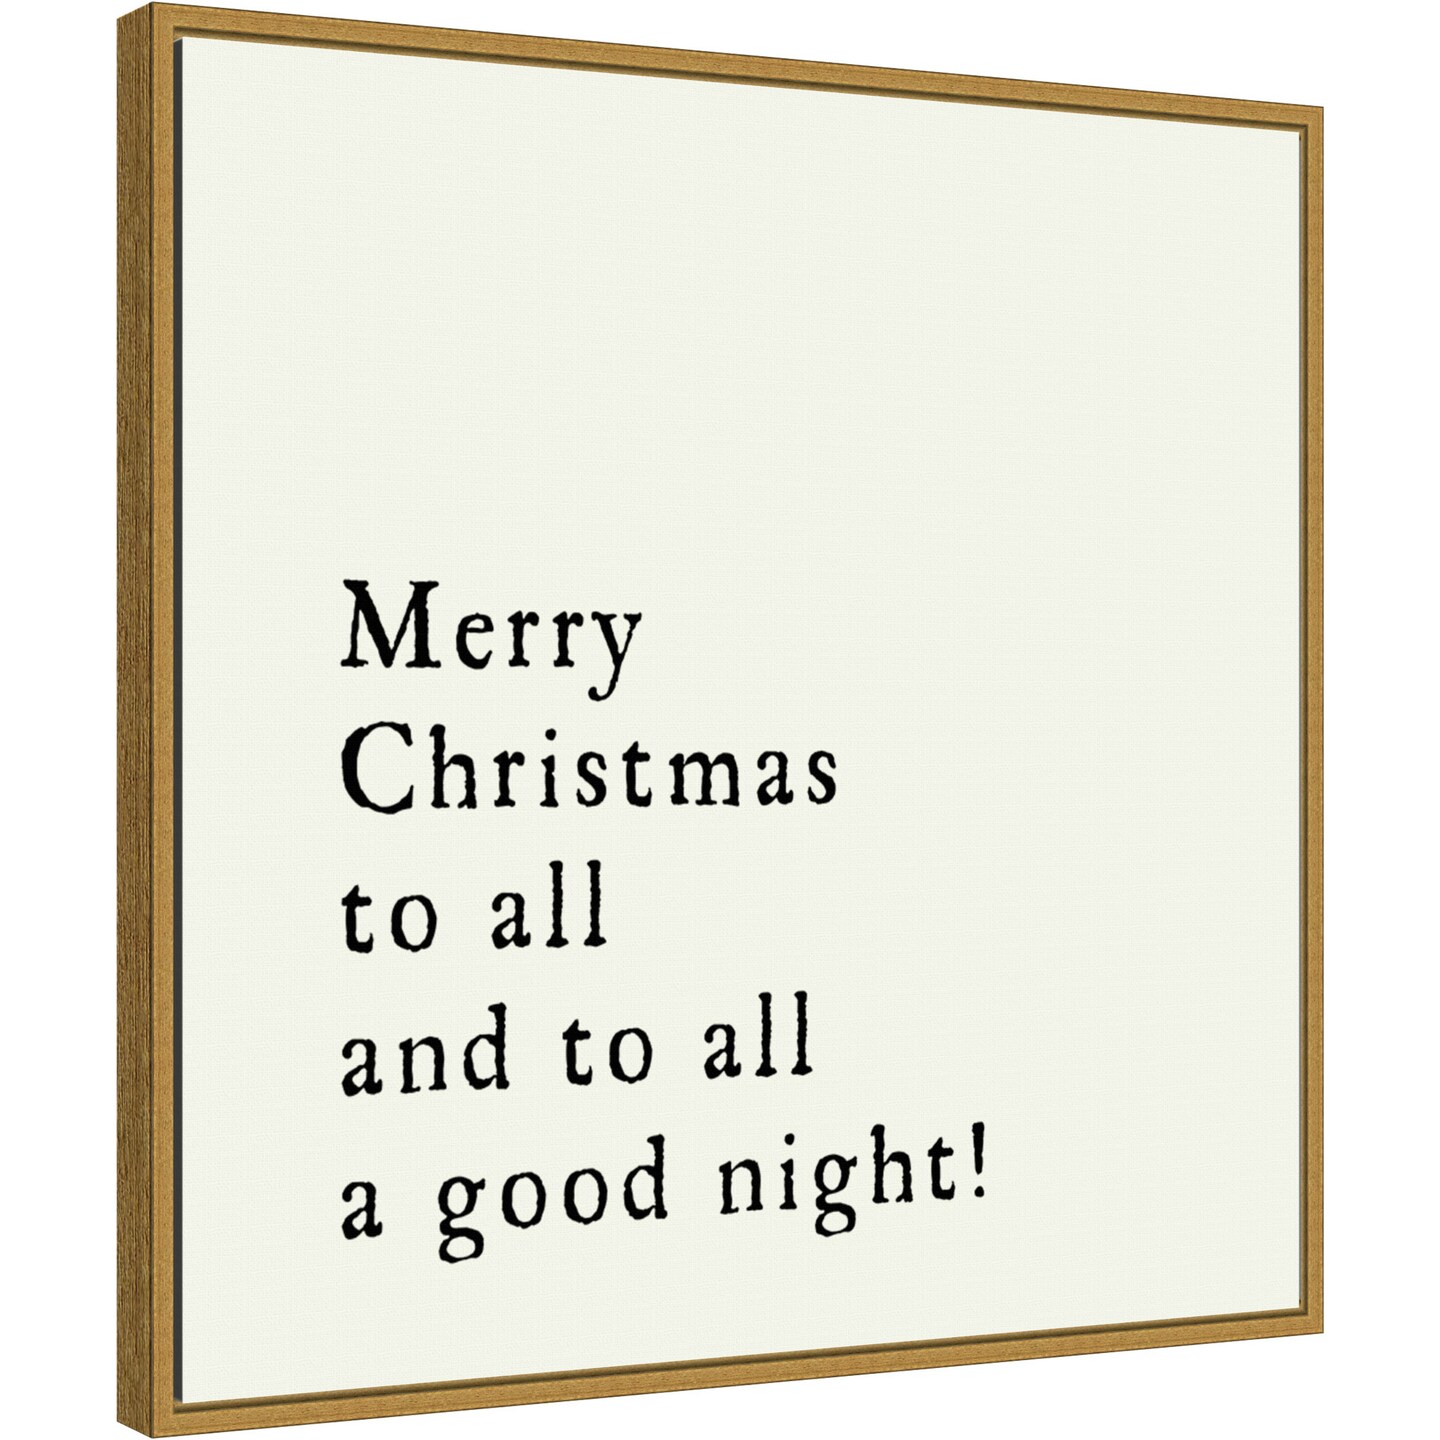 Merry Christmas To All by Amanti Art Portfolio 22-in. W x 22-in. H. Canvas Wall Art Print Framed in Gold